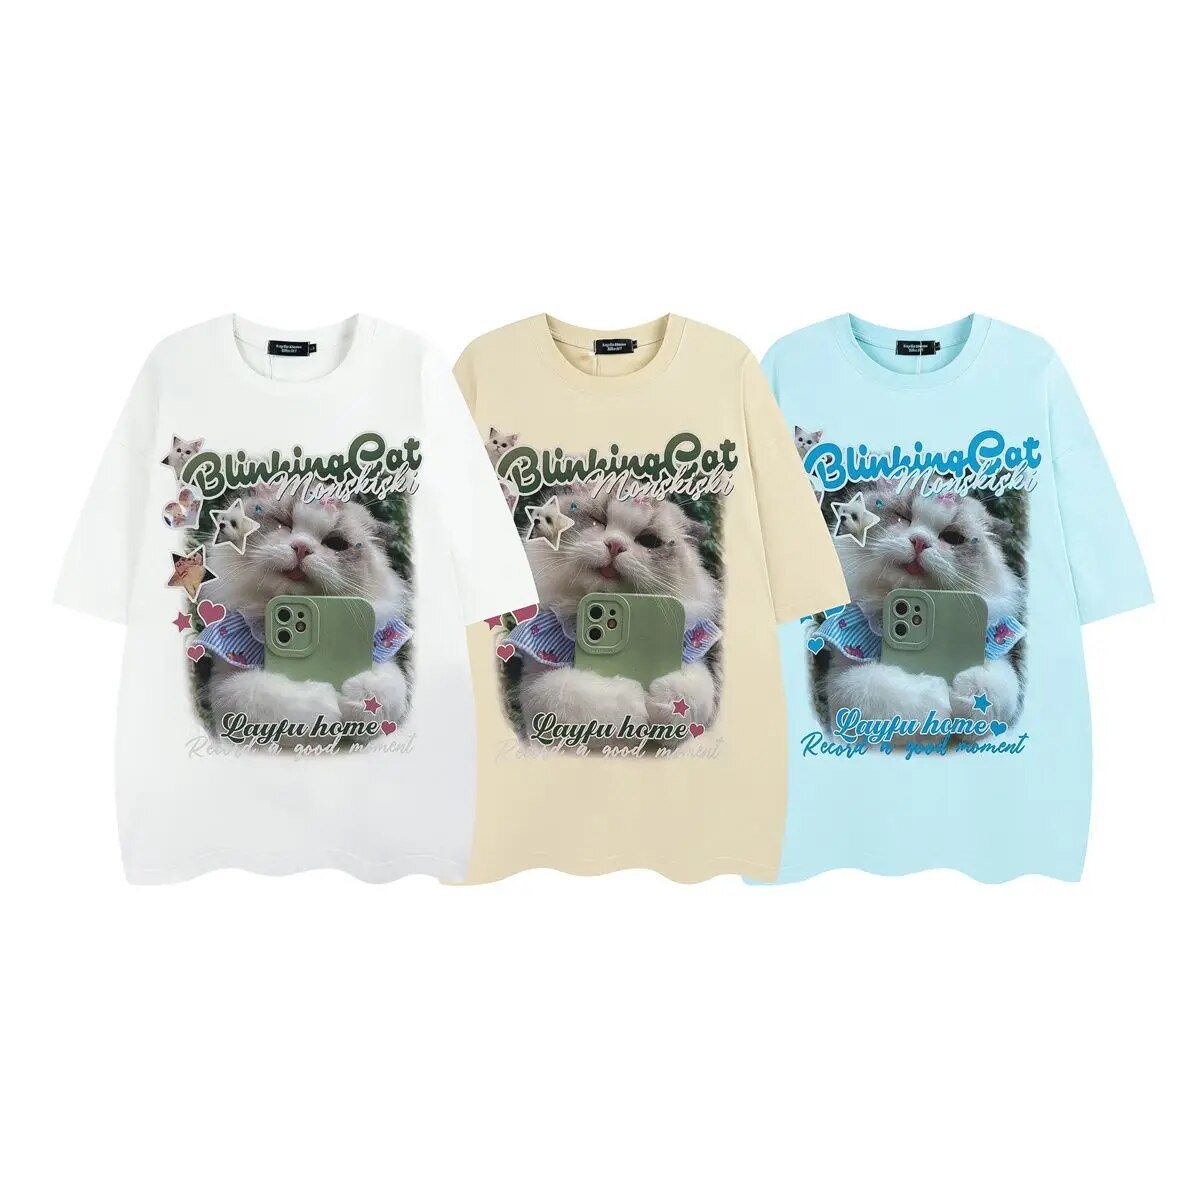 Nostalgic Y2K design t-shirt in white, blue, and apricot